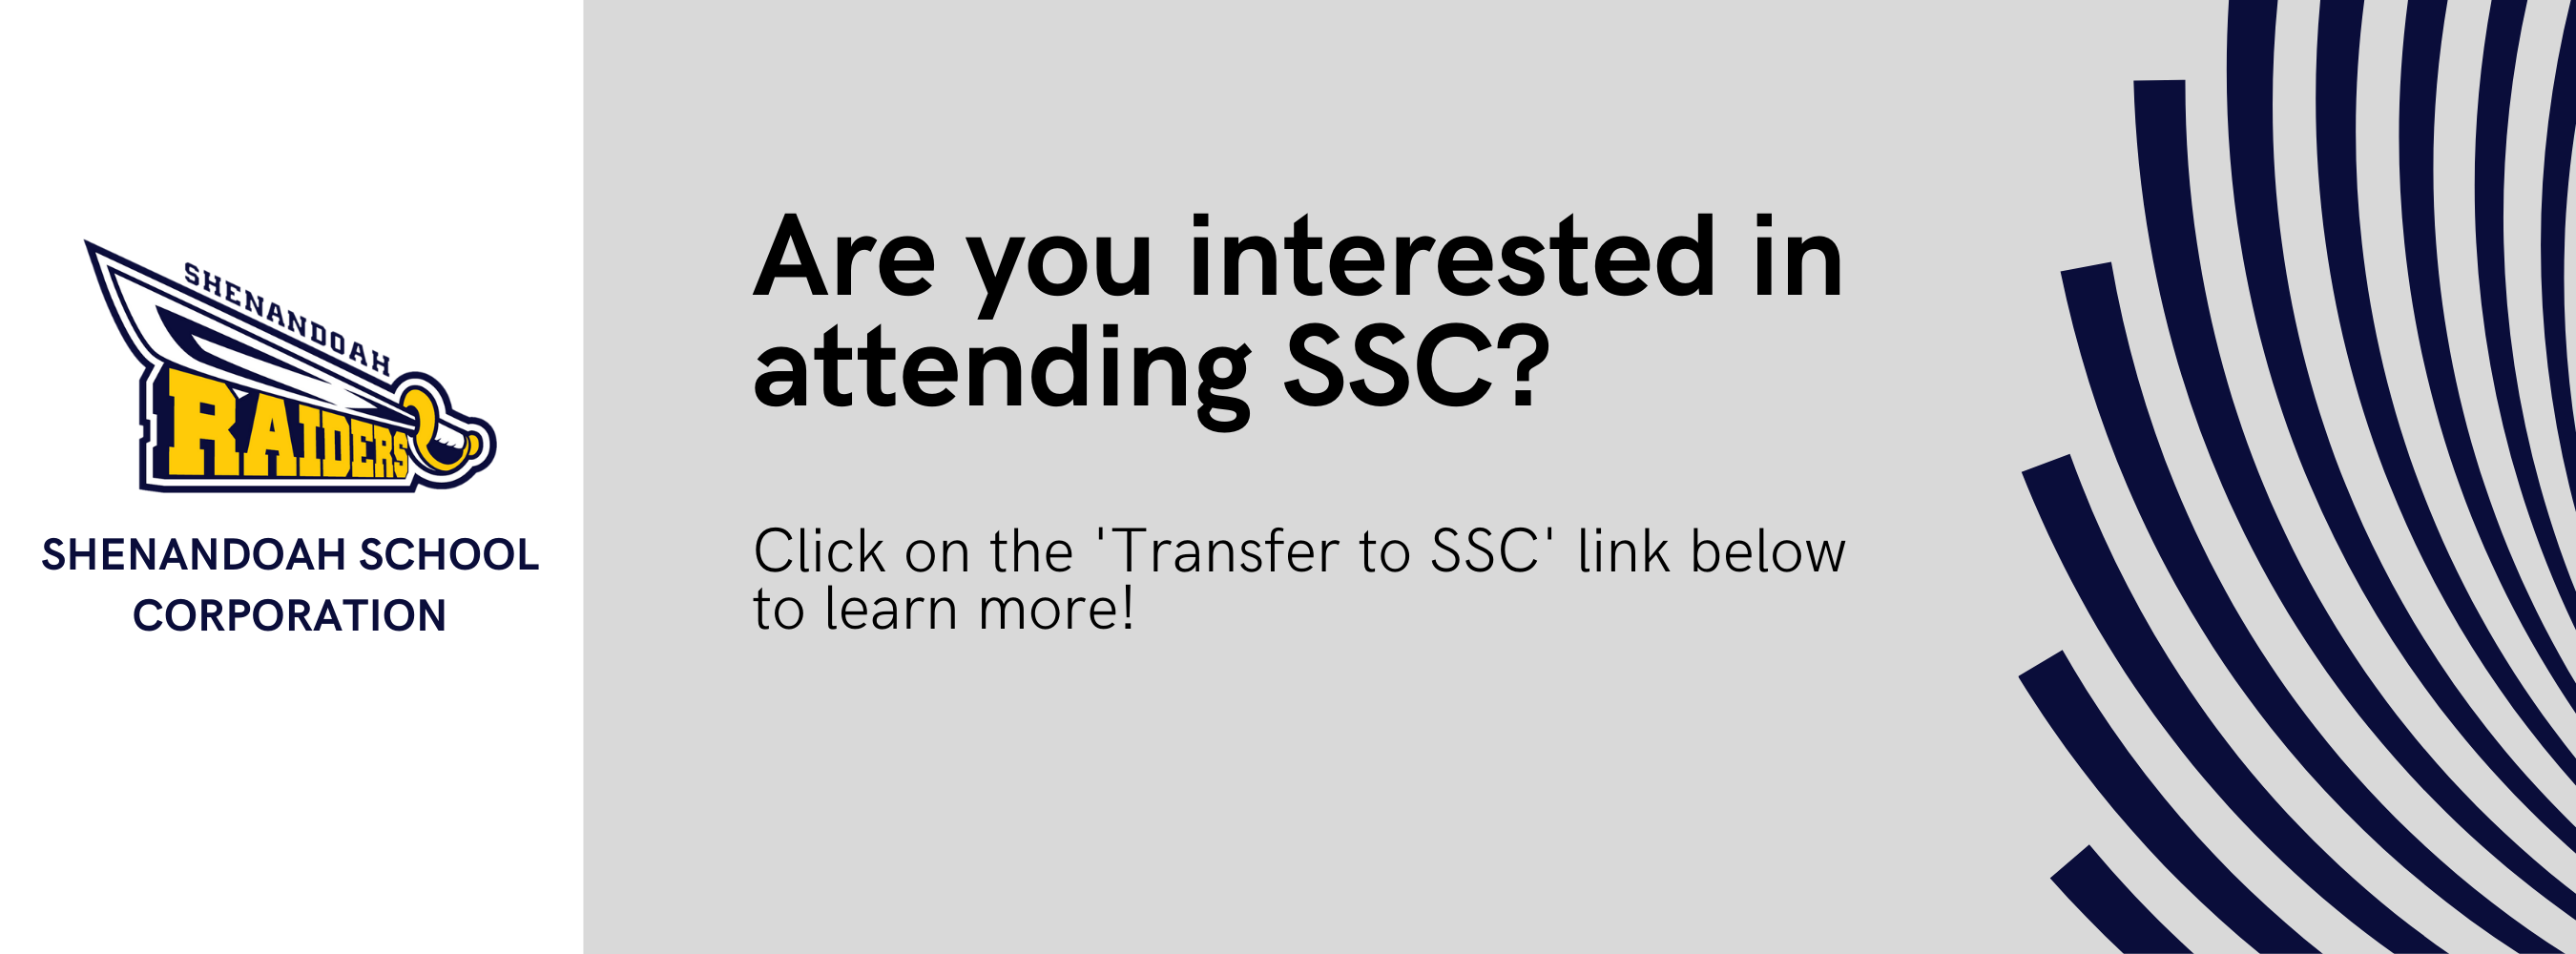 Are you interested in attending SSC? Click on the 'transfer to ssc' link below to learn more. 